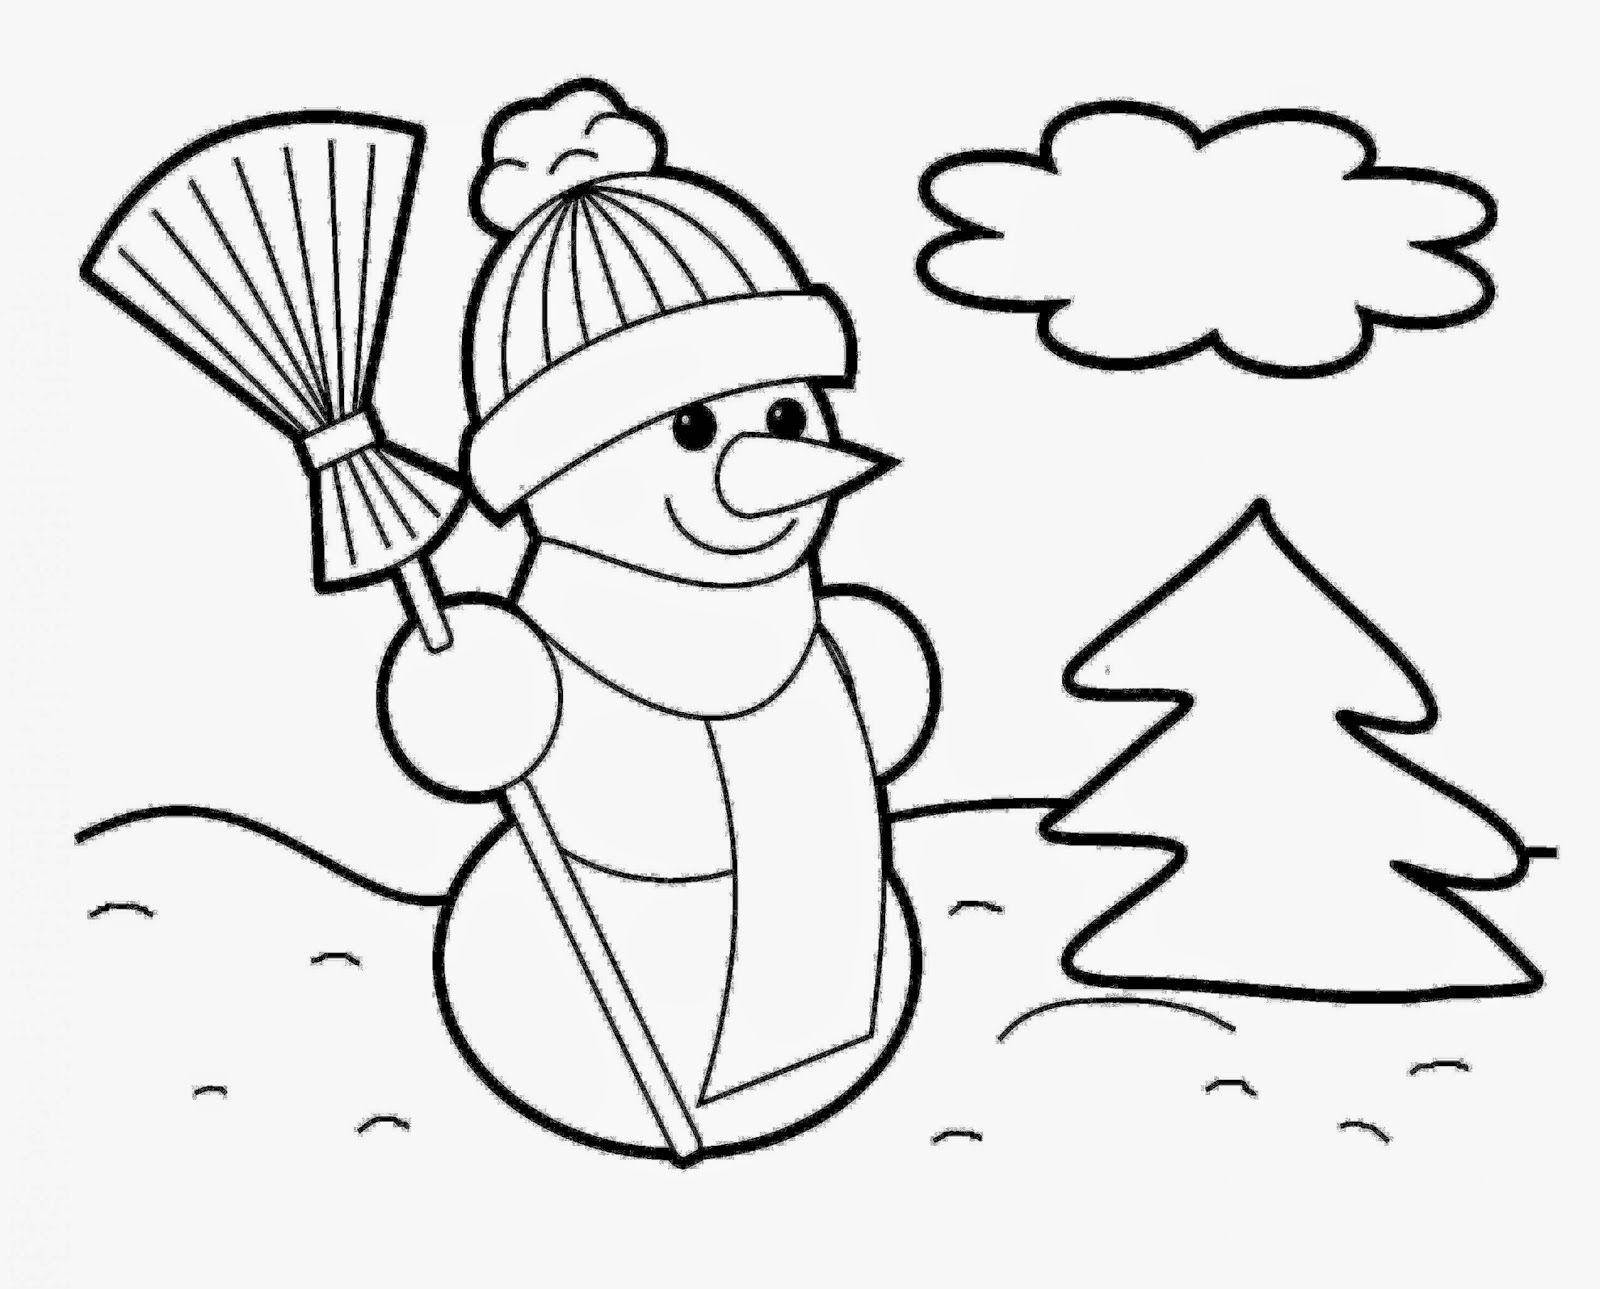 Coloring Snowman with broom. Category winter activities. Tags:  snowman, broom, hat, tree.